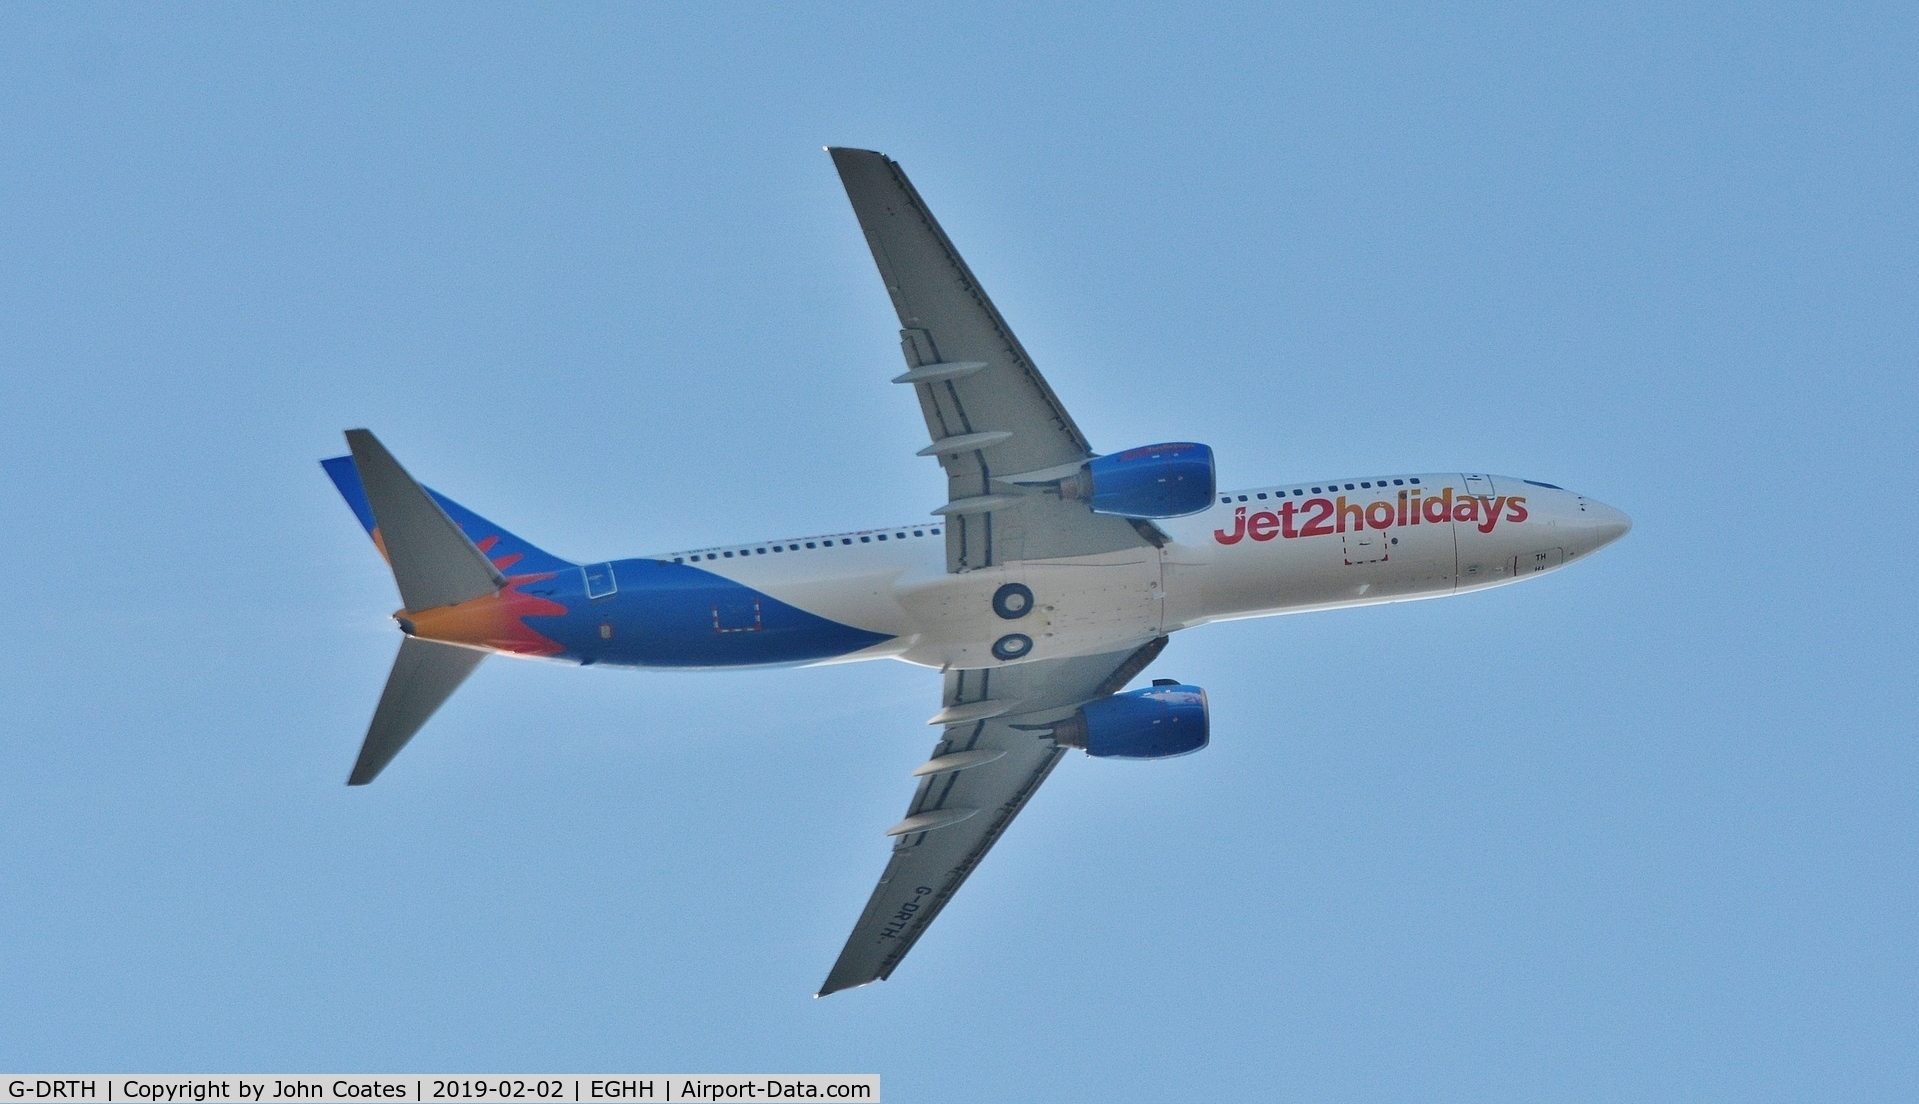 G-DRTH, 2006 Boeing 737-8BK C/N 33828, Departs in poor weather after paint to Jet 2